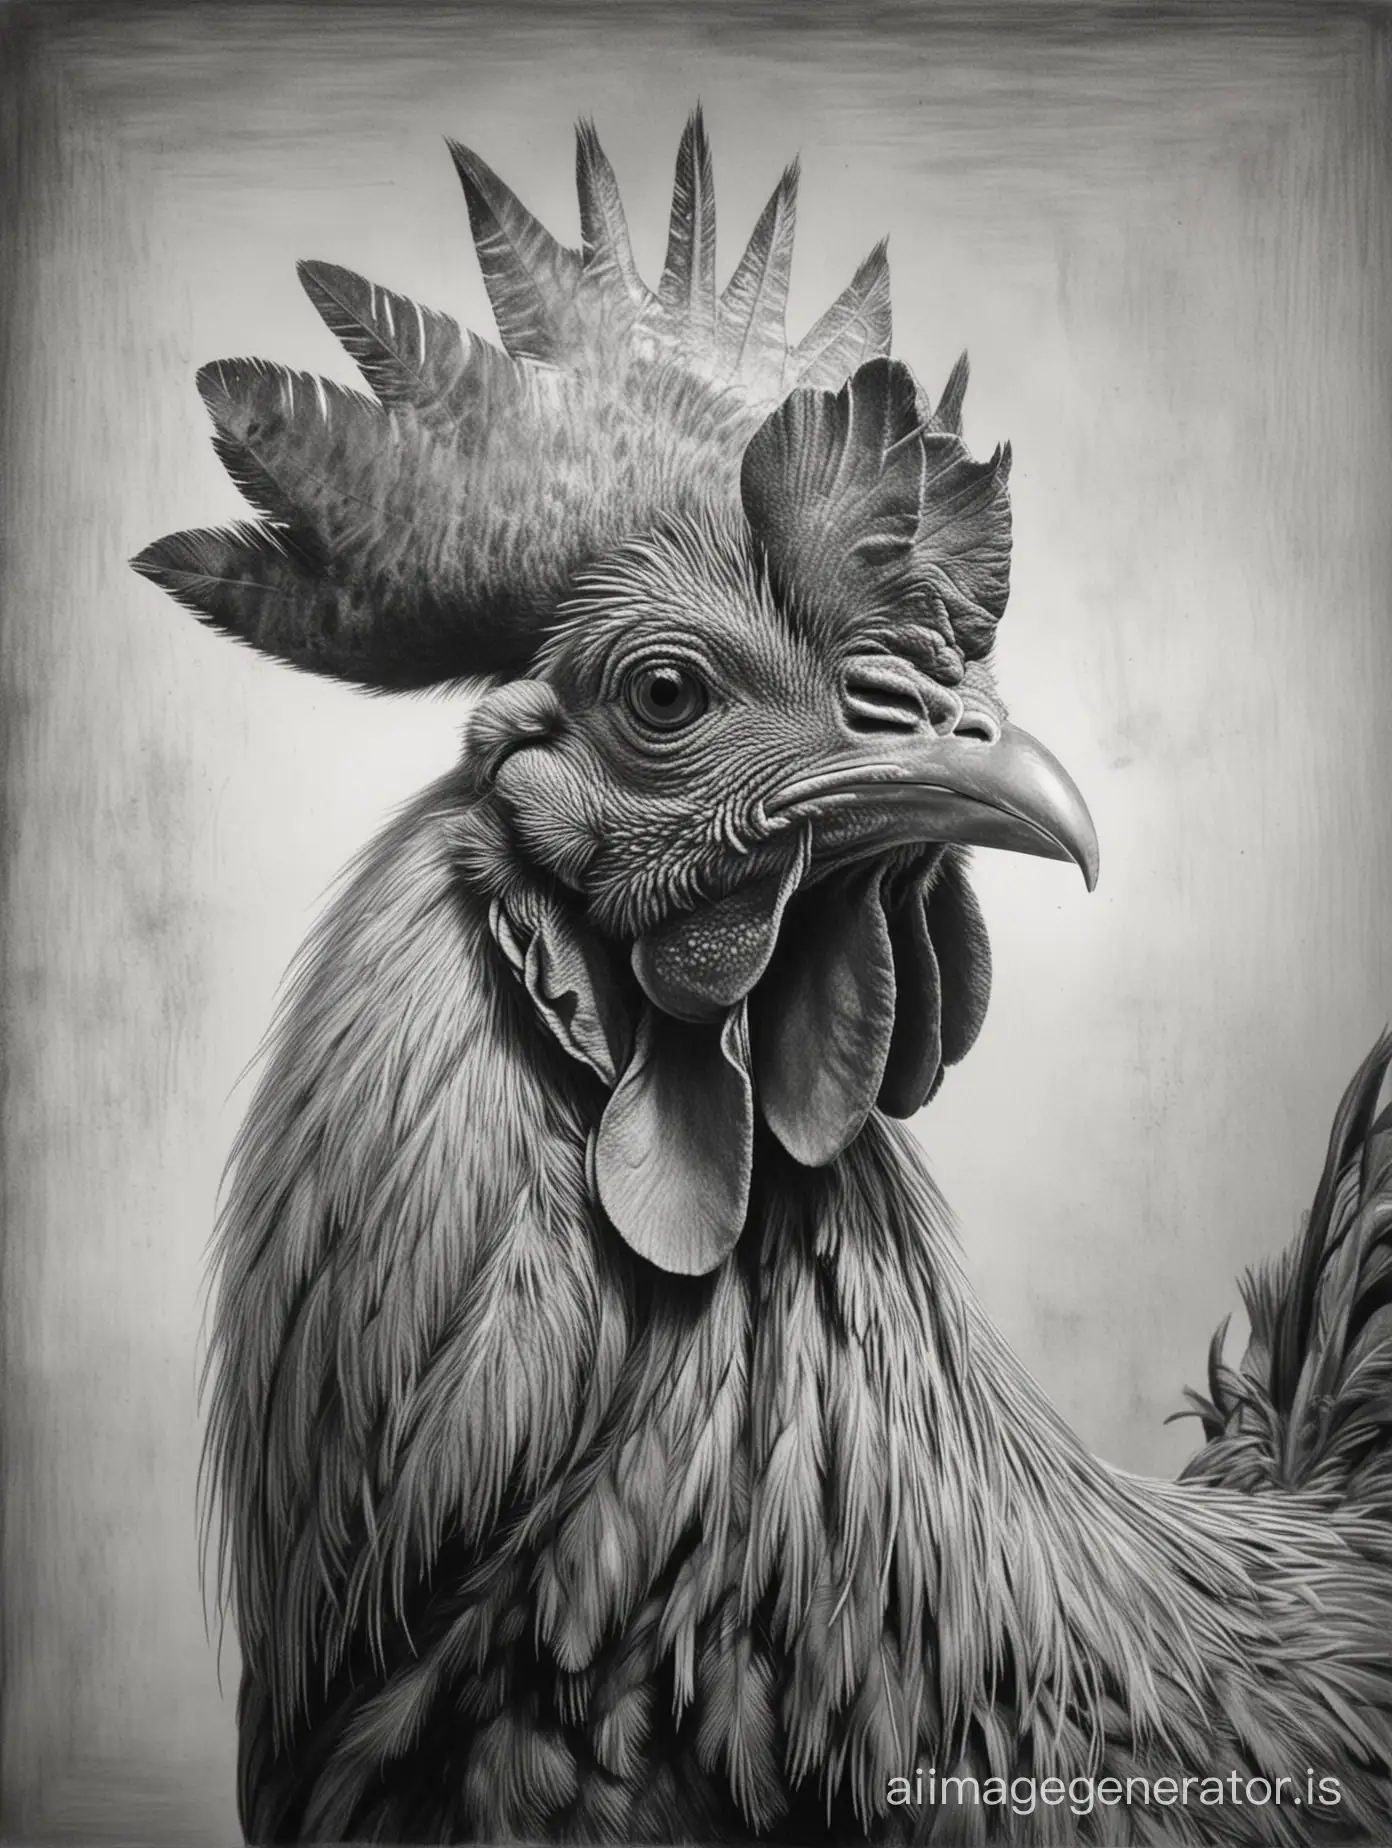 PicassoStyle-Monochrome-Artistic-Rendering-of-a-Kelso-Rooster